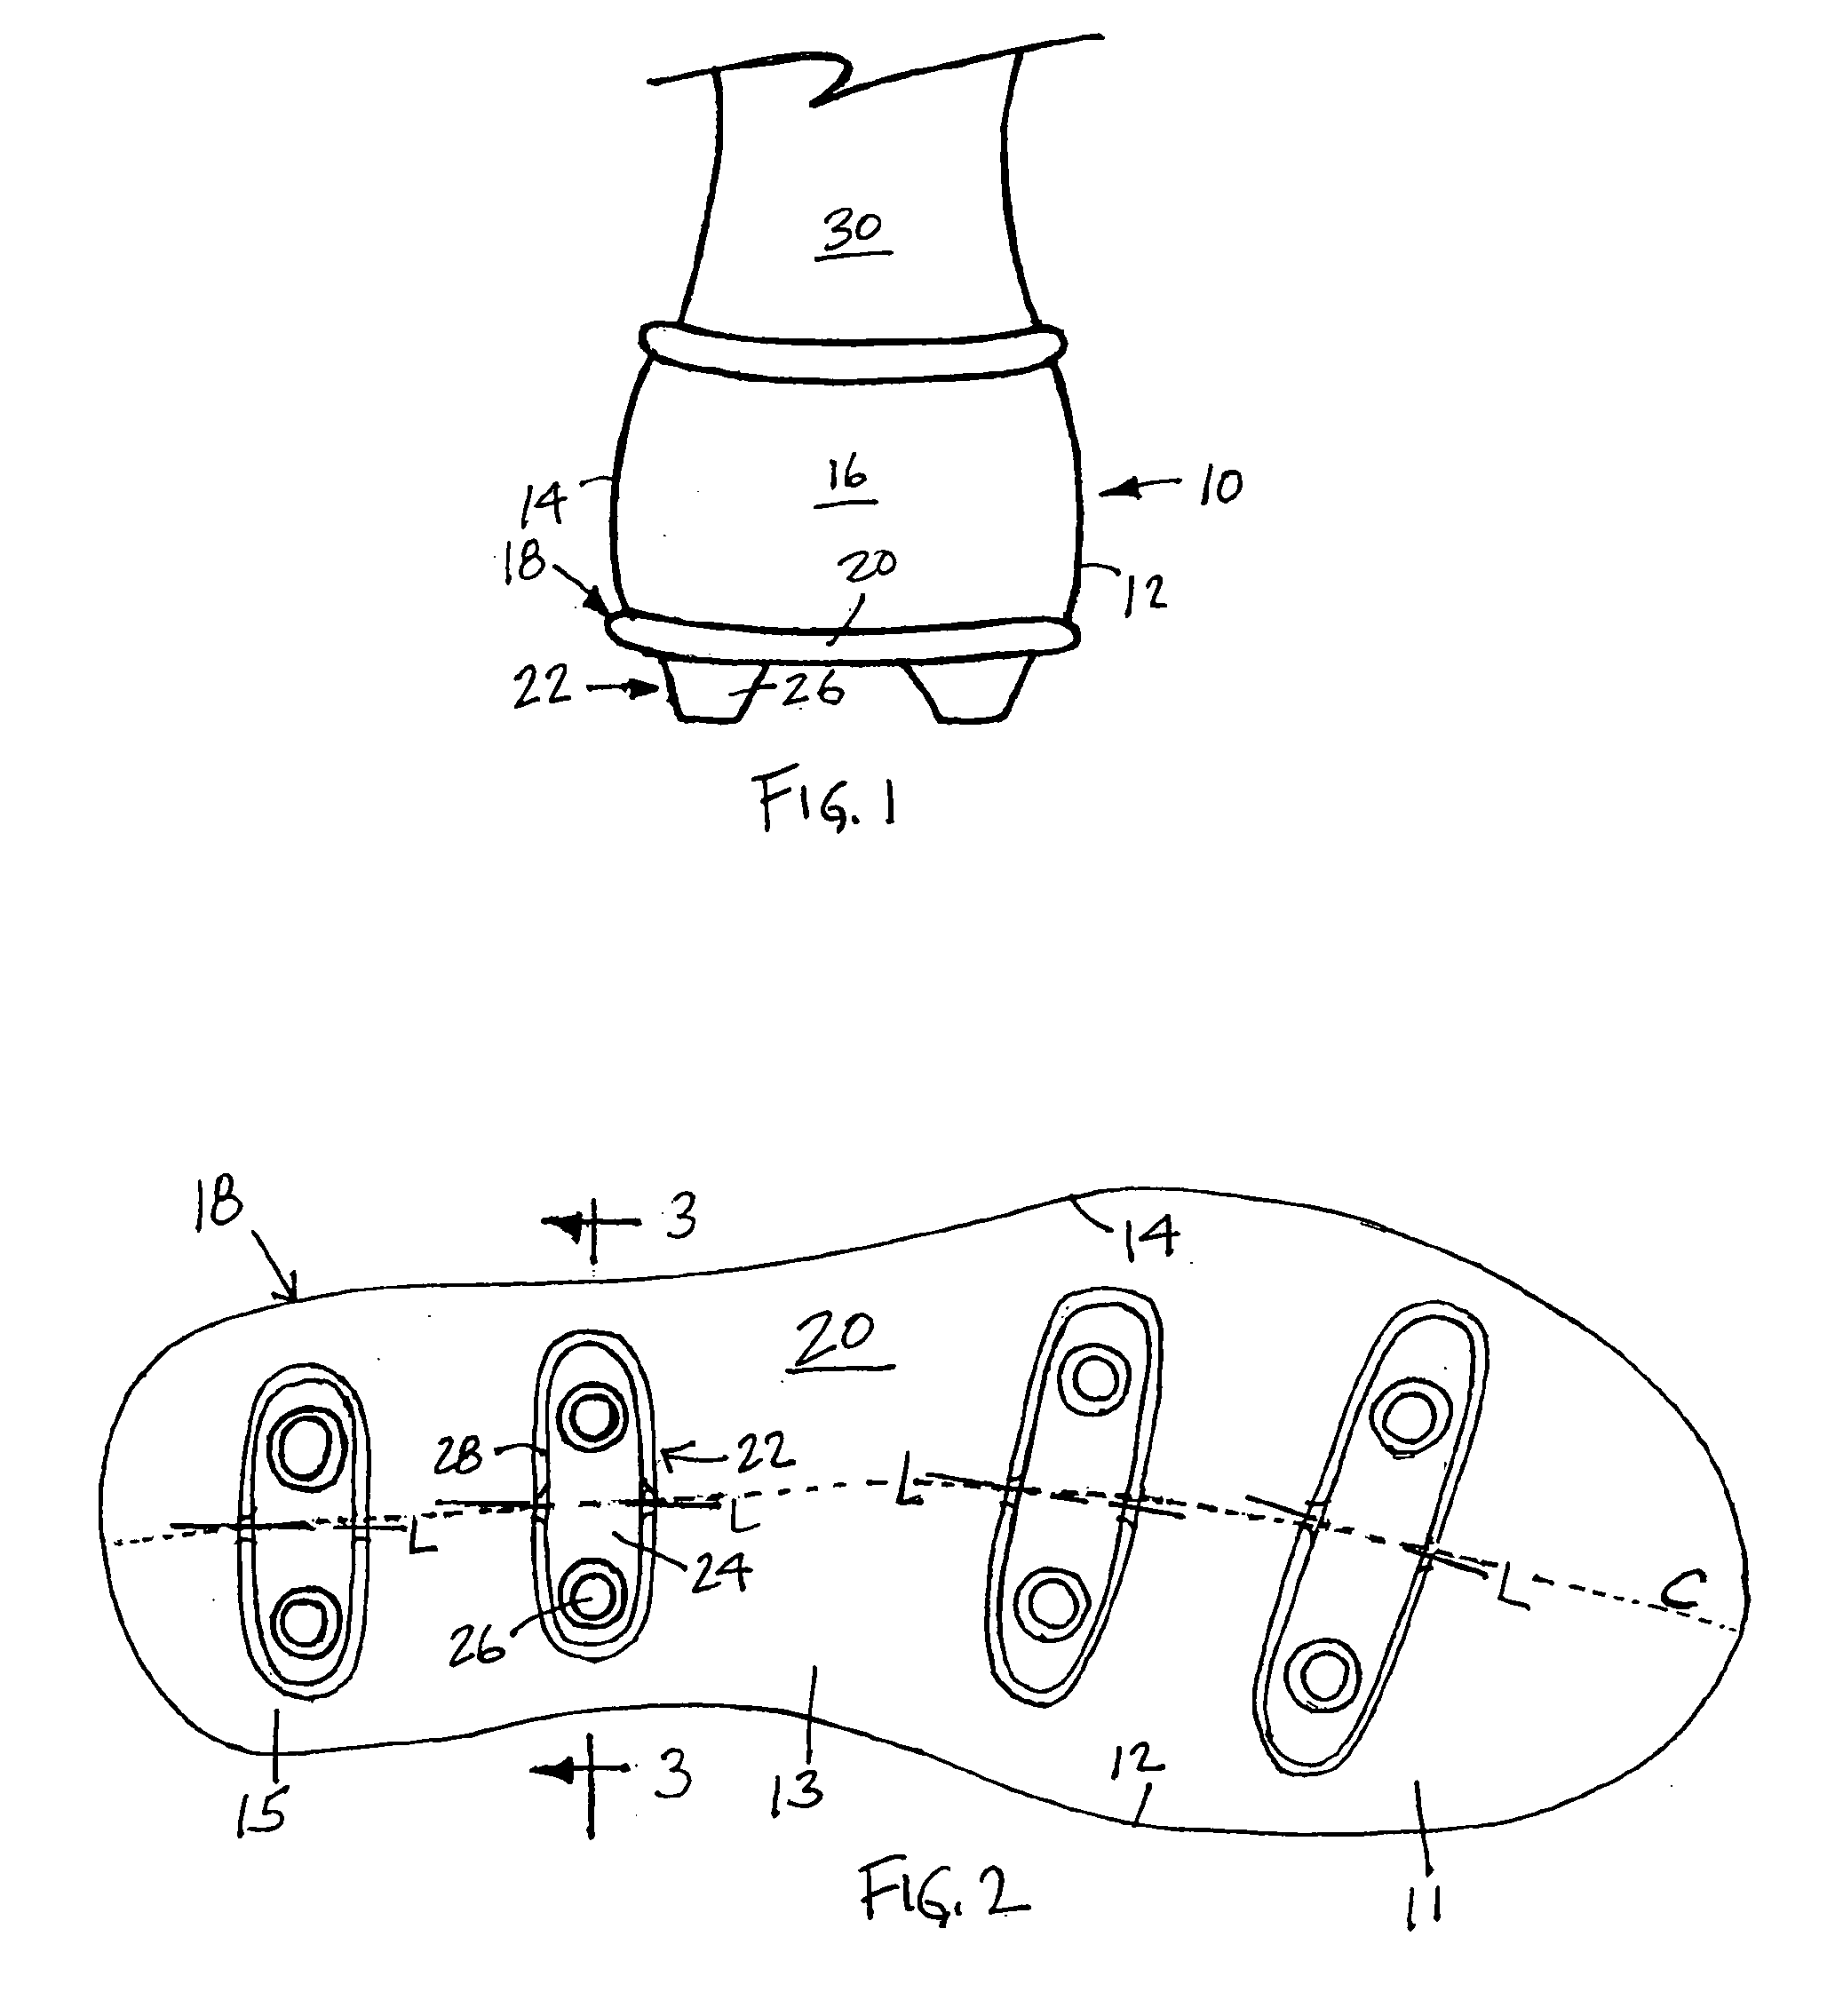 Sole structure with pivoting cleat assembly